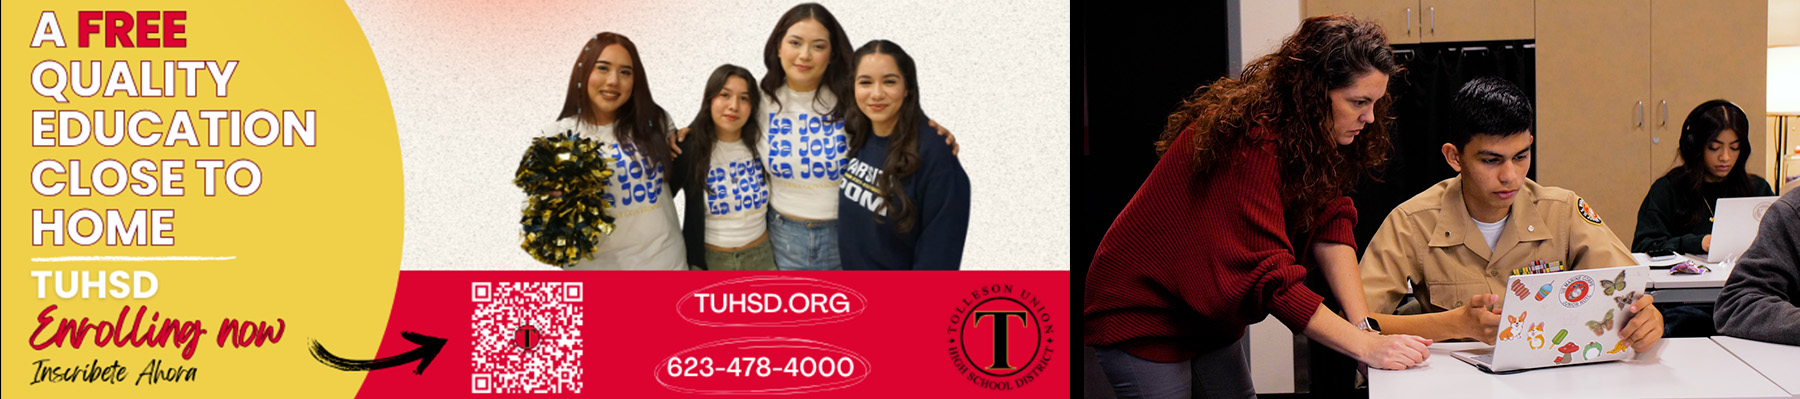 SUPPORT OUR SCHOOLS WITH A TAX CREDIT DONATION! Single person donation of $200 or married joint filing donation of $400 Remember TUHSD when you're filing your taxes! | Teacher assisting student with laptop